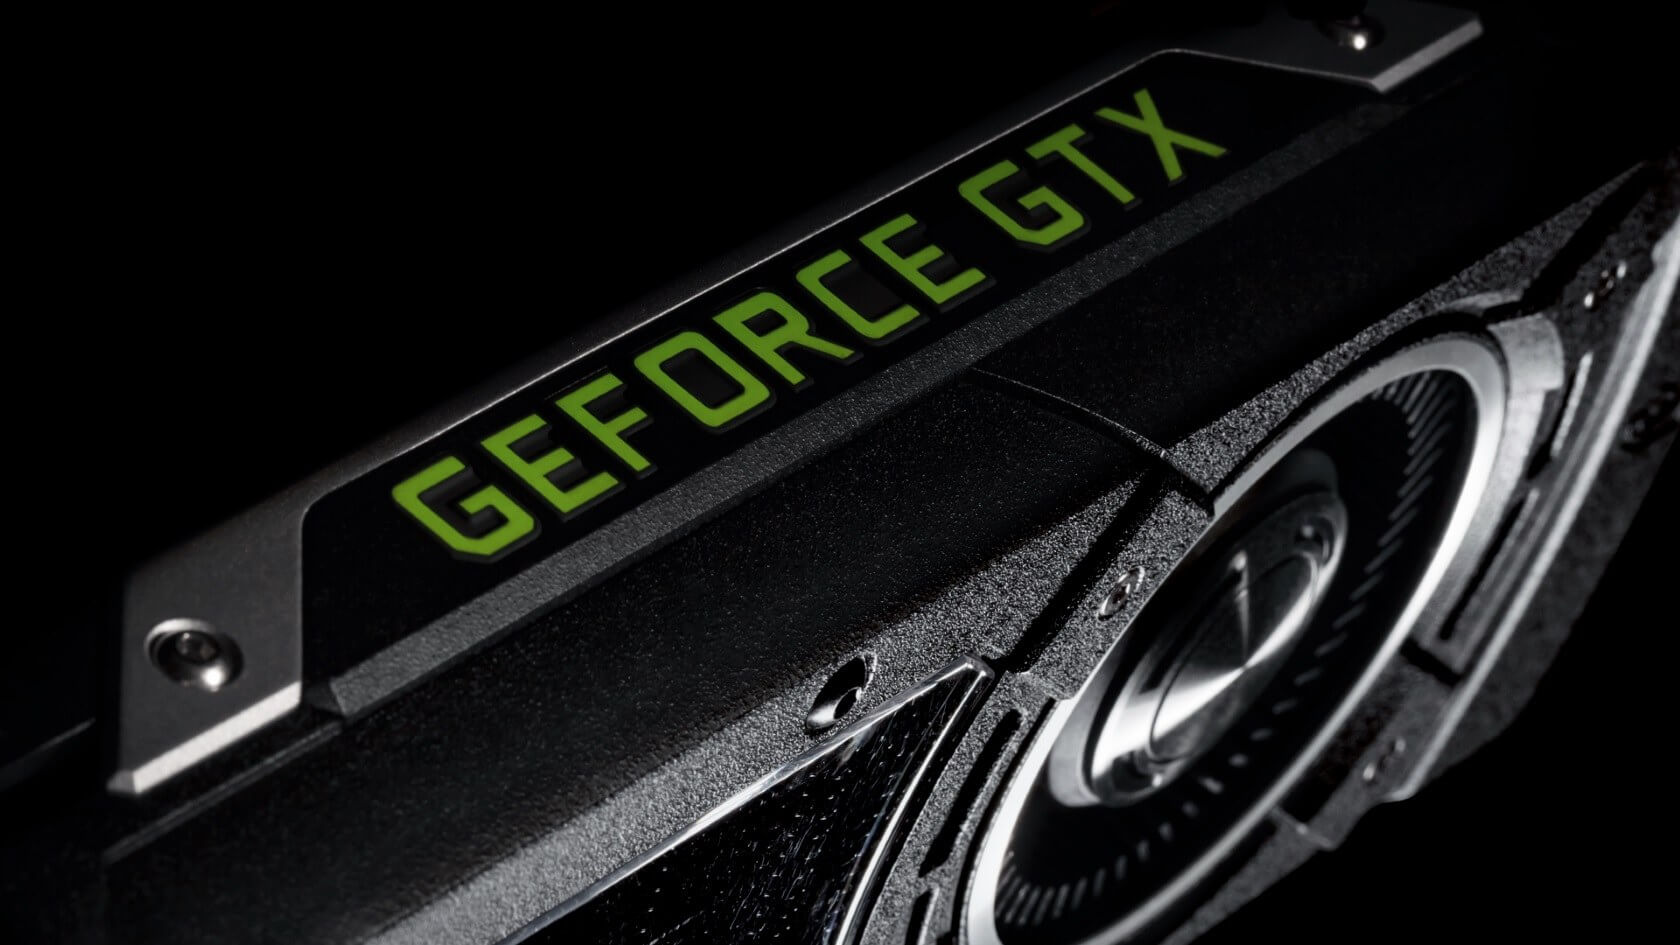 Rumors suggest Nvidia could be working on an RTX-free GeForce GTX 1660 Ti